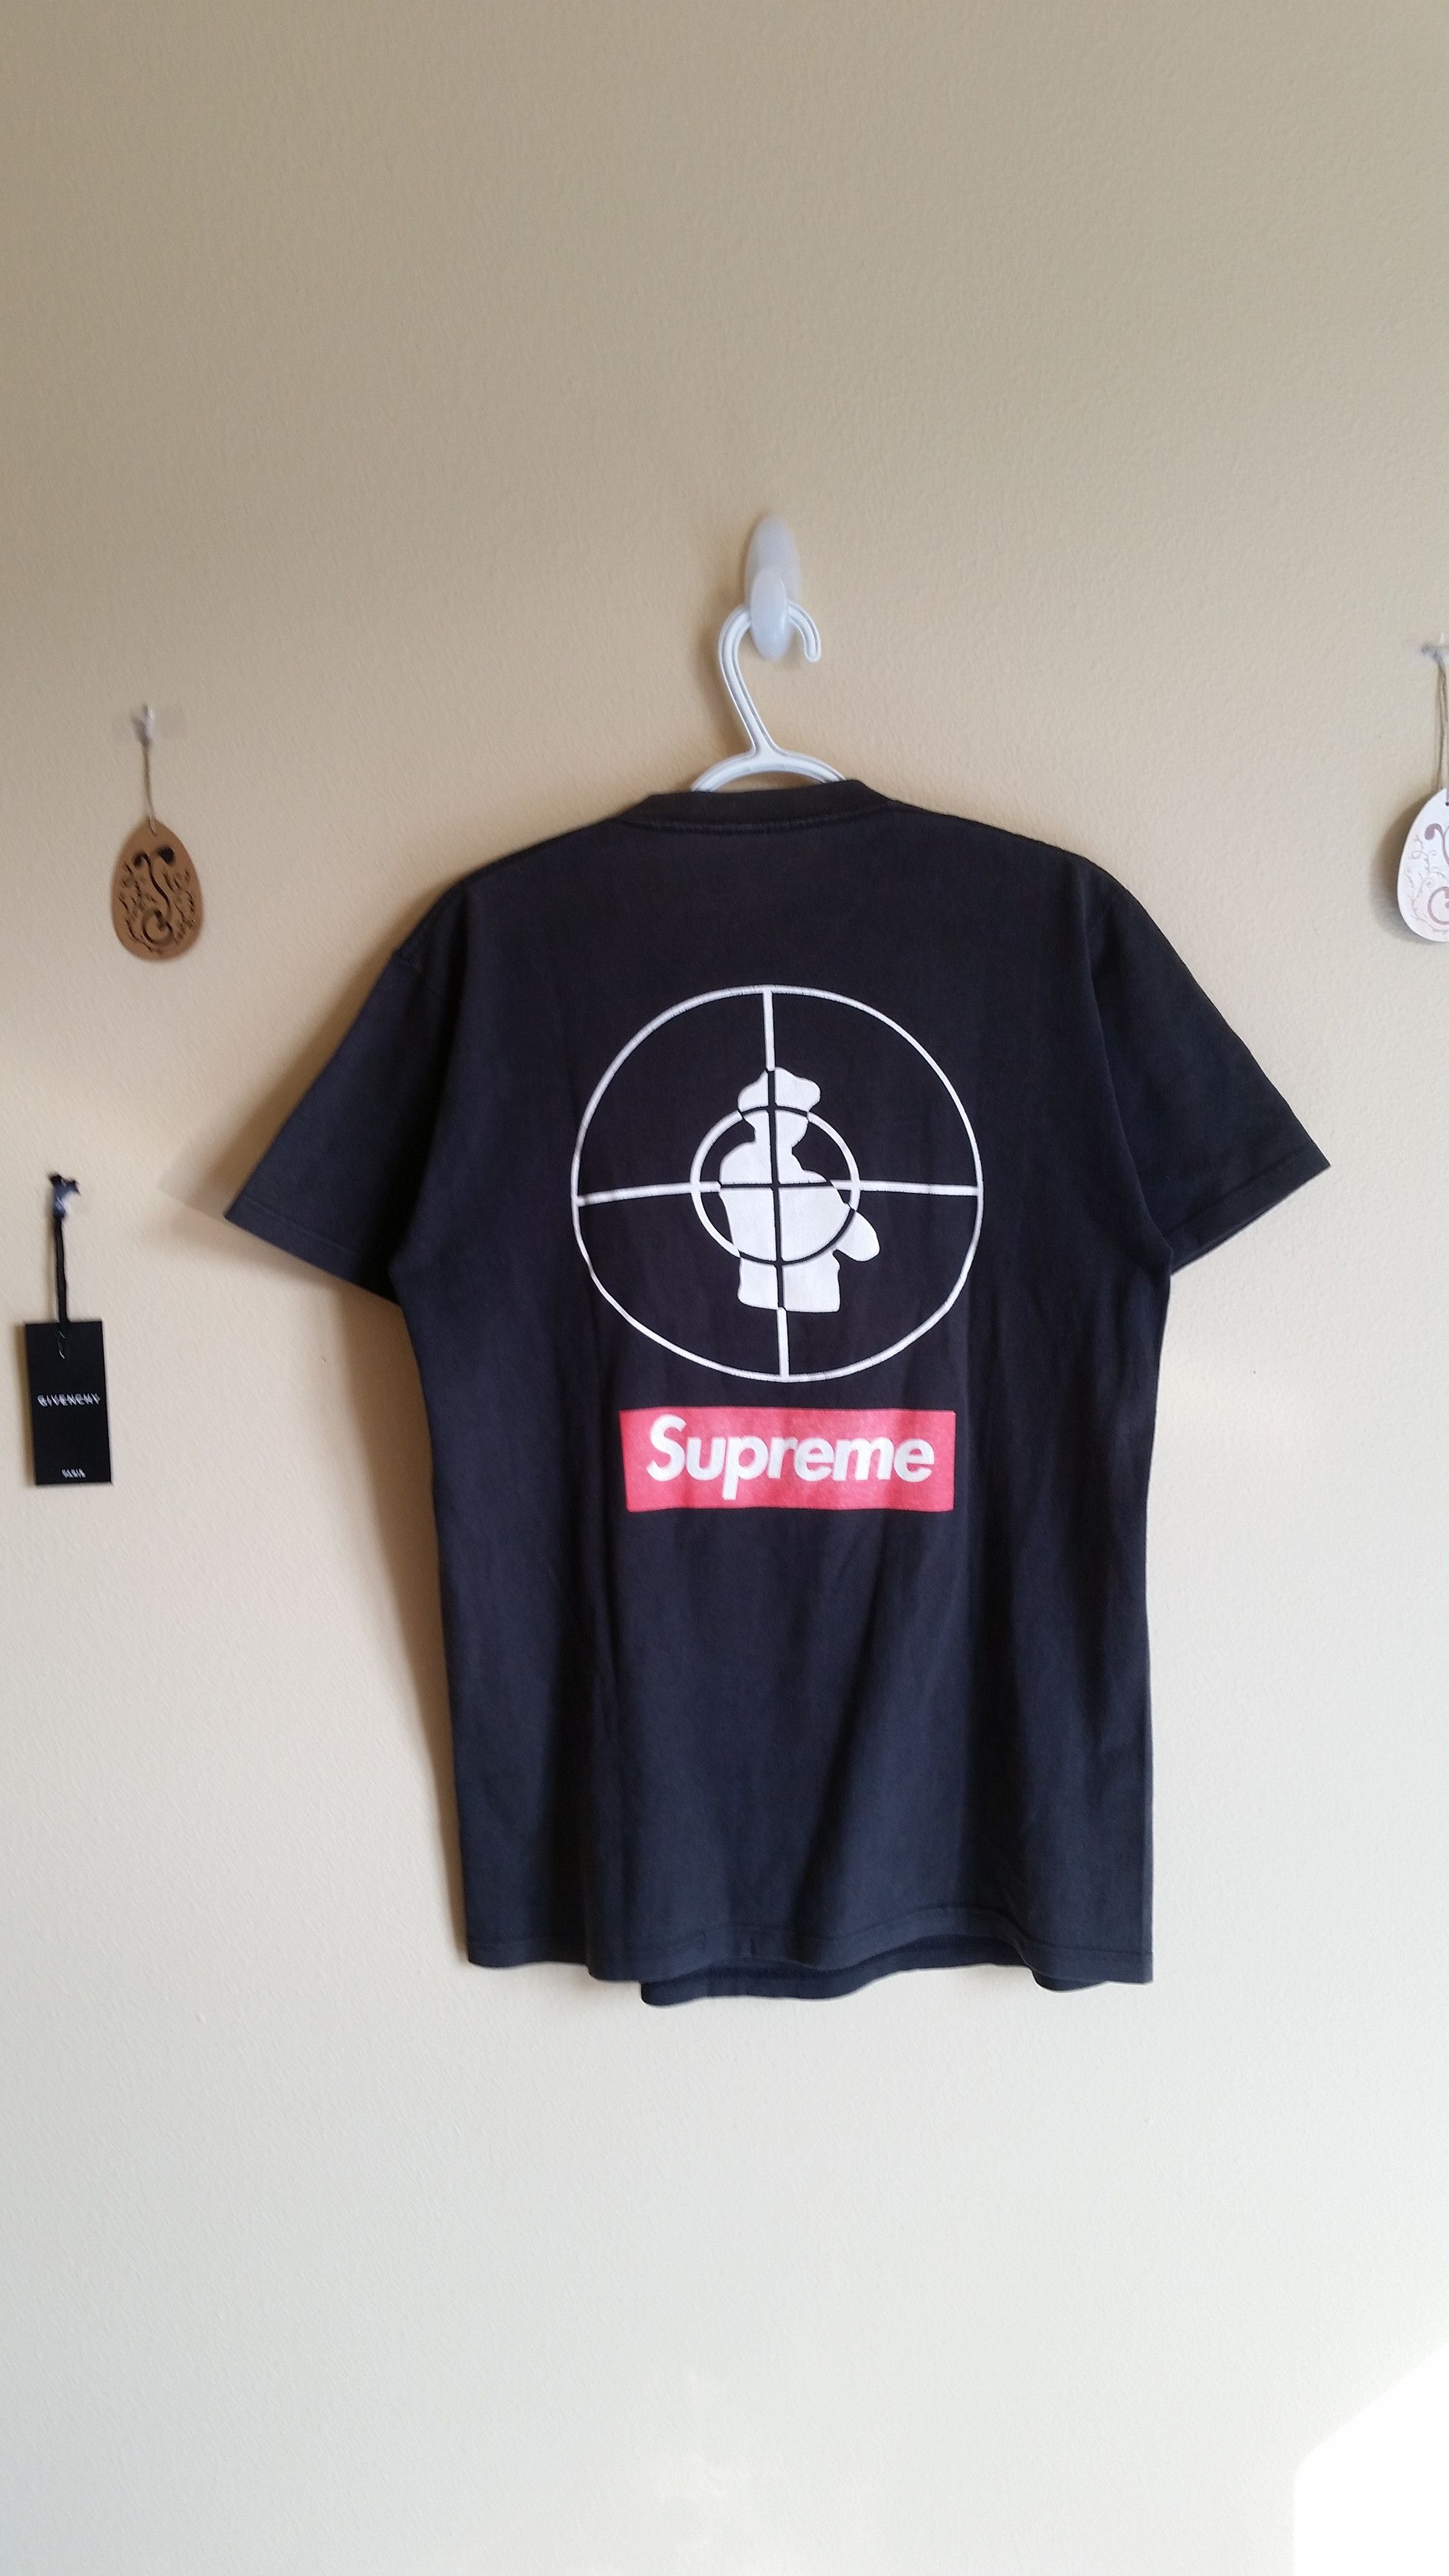 Supreme x Public Enemy 'You're Gonna Get Yours' Tee Shirt S/S06